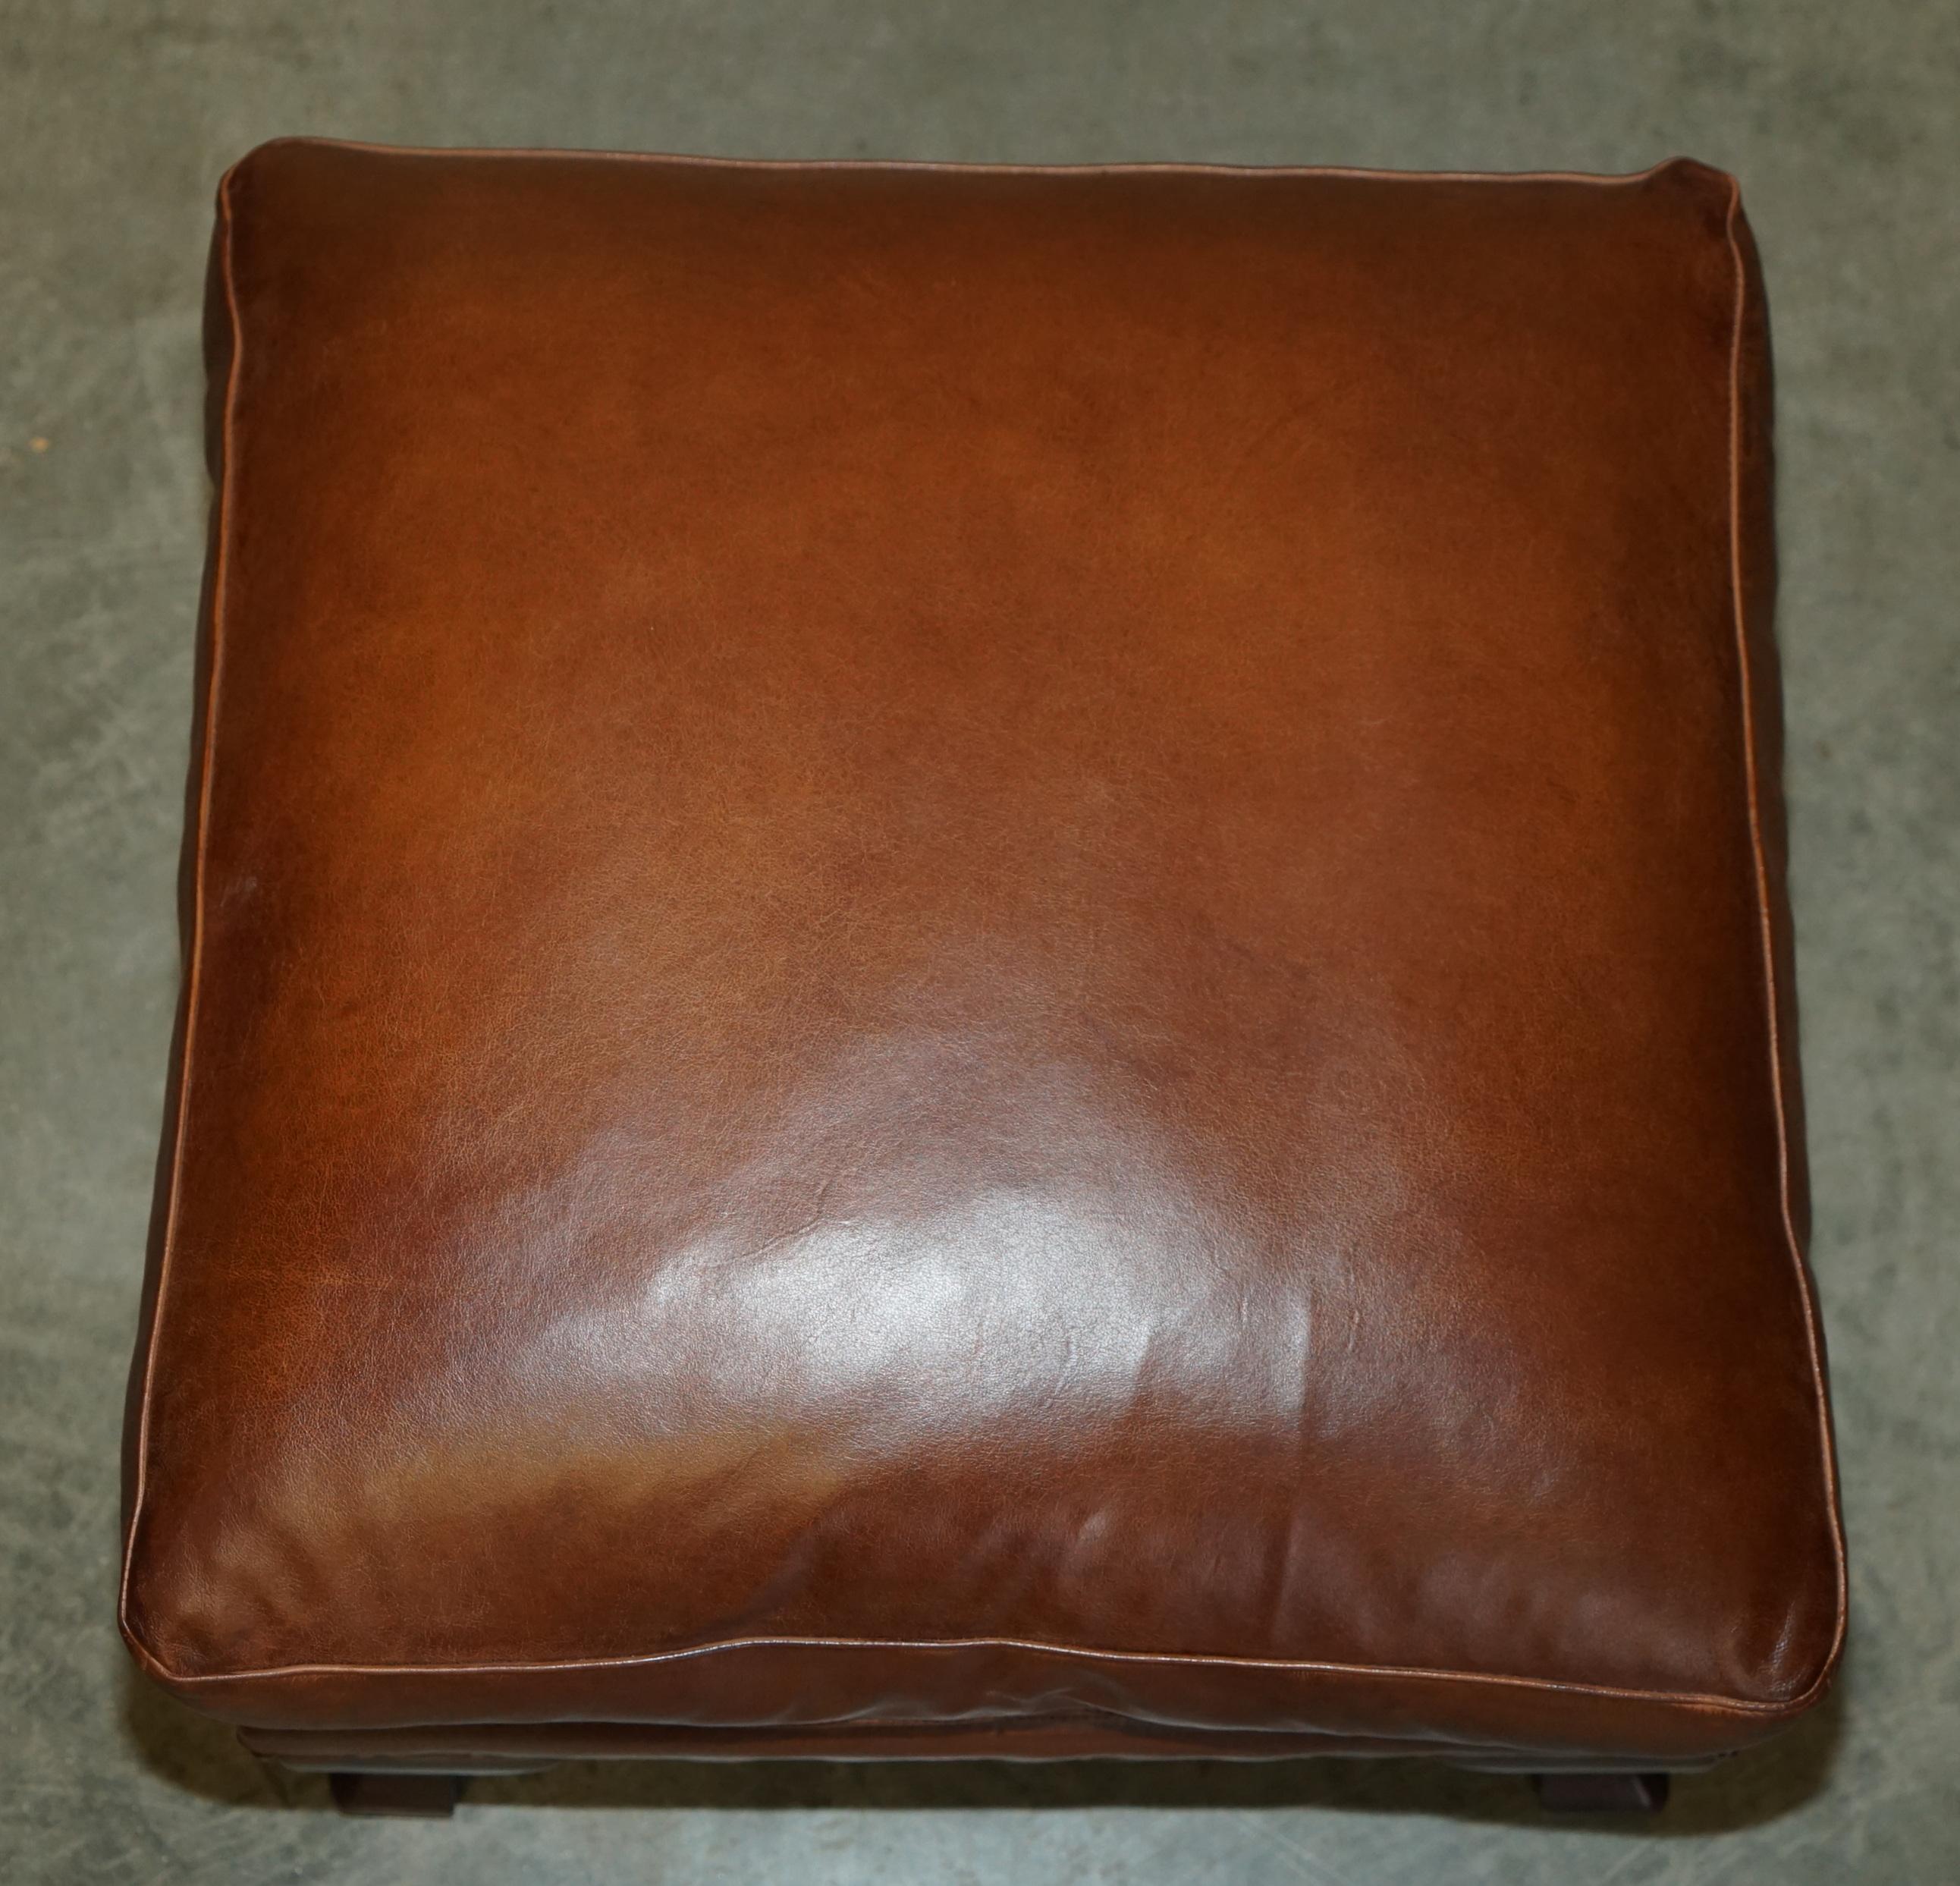 English TETRAD BROWN LEATHER LARGE FOOTSTOOL LARGE ENoUGH FOR TWO PEOPLE TO SHARE For Sale